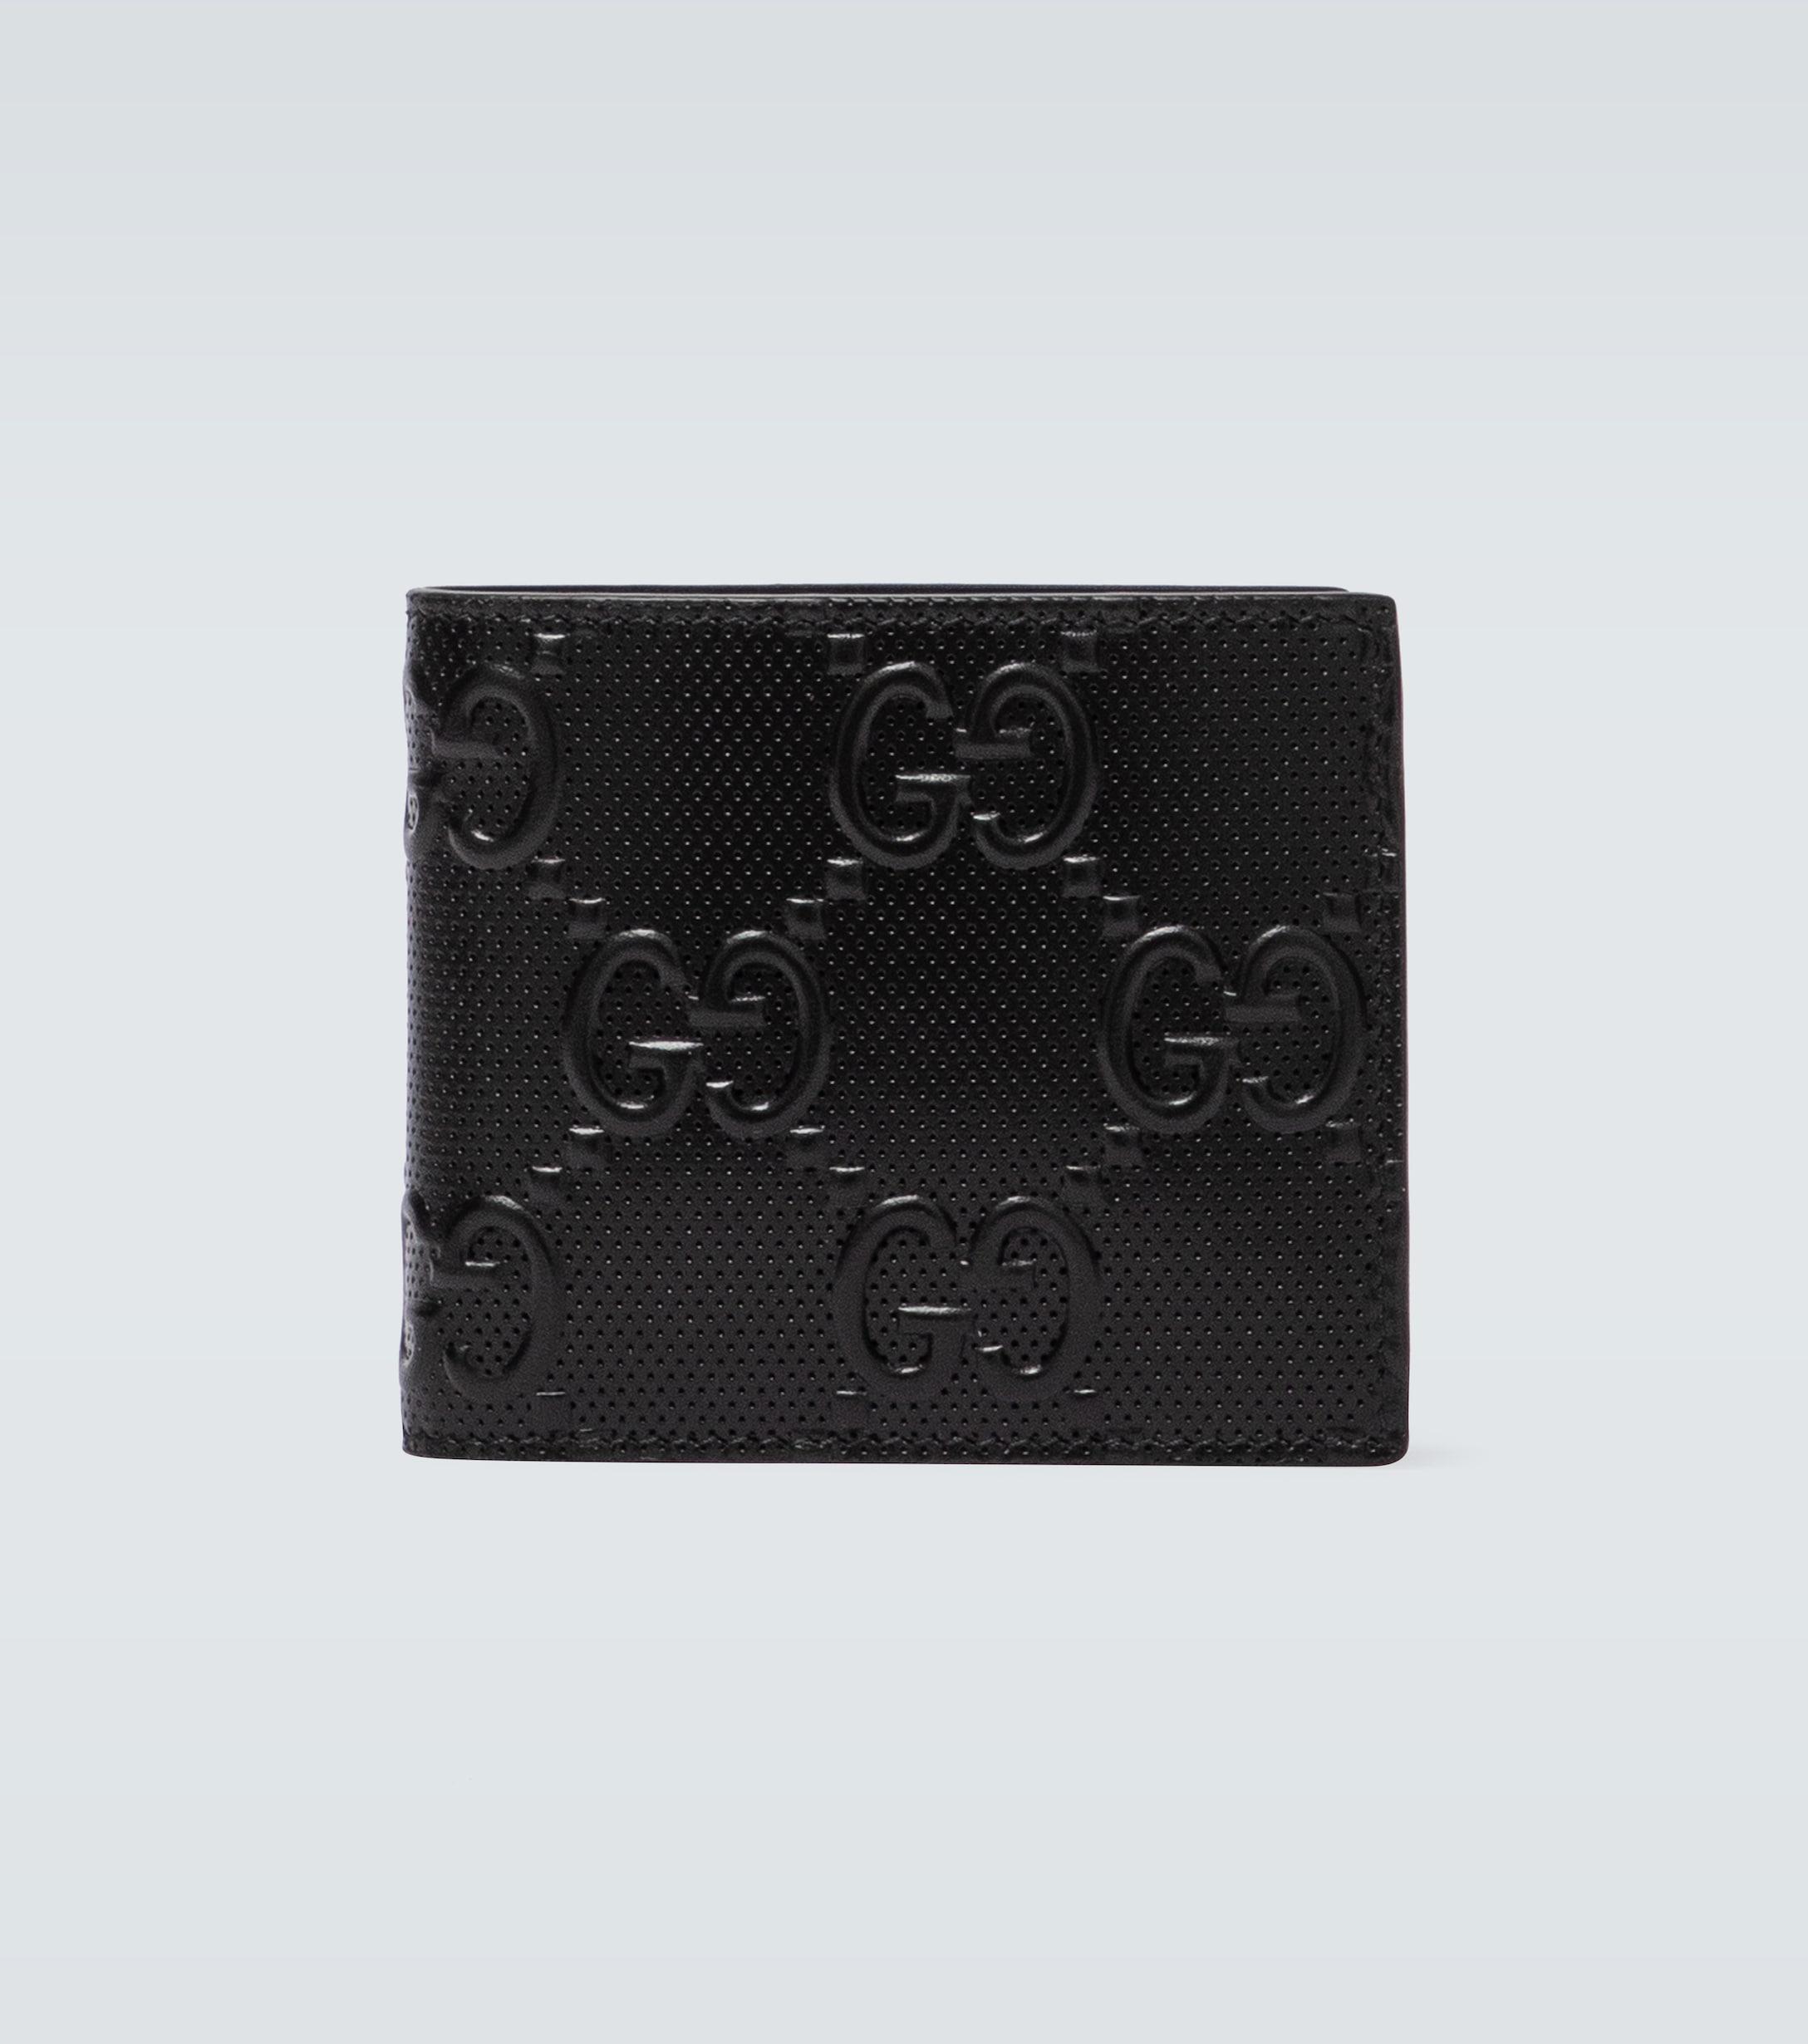 Gucci Embossed GG Leather Wallet in Black for Men - Lyst